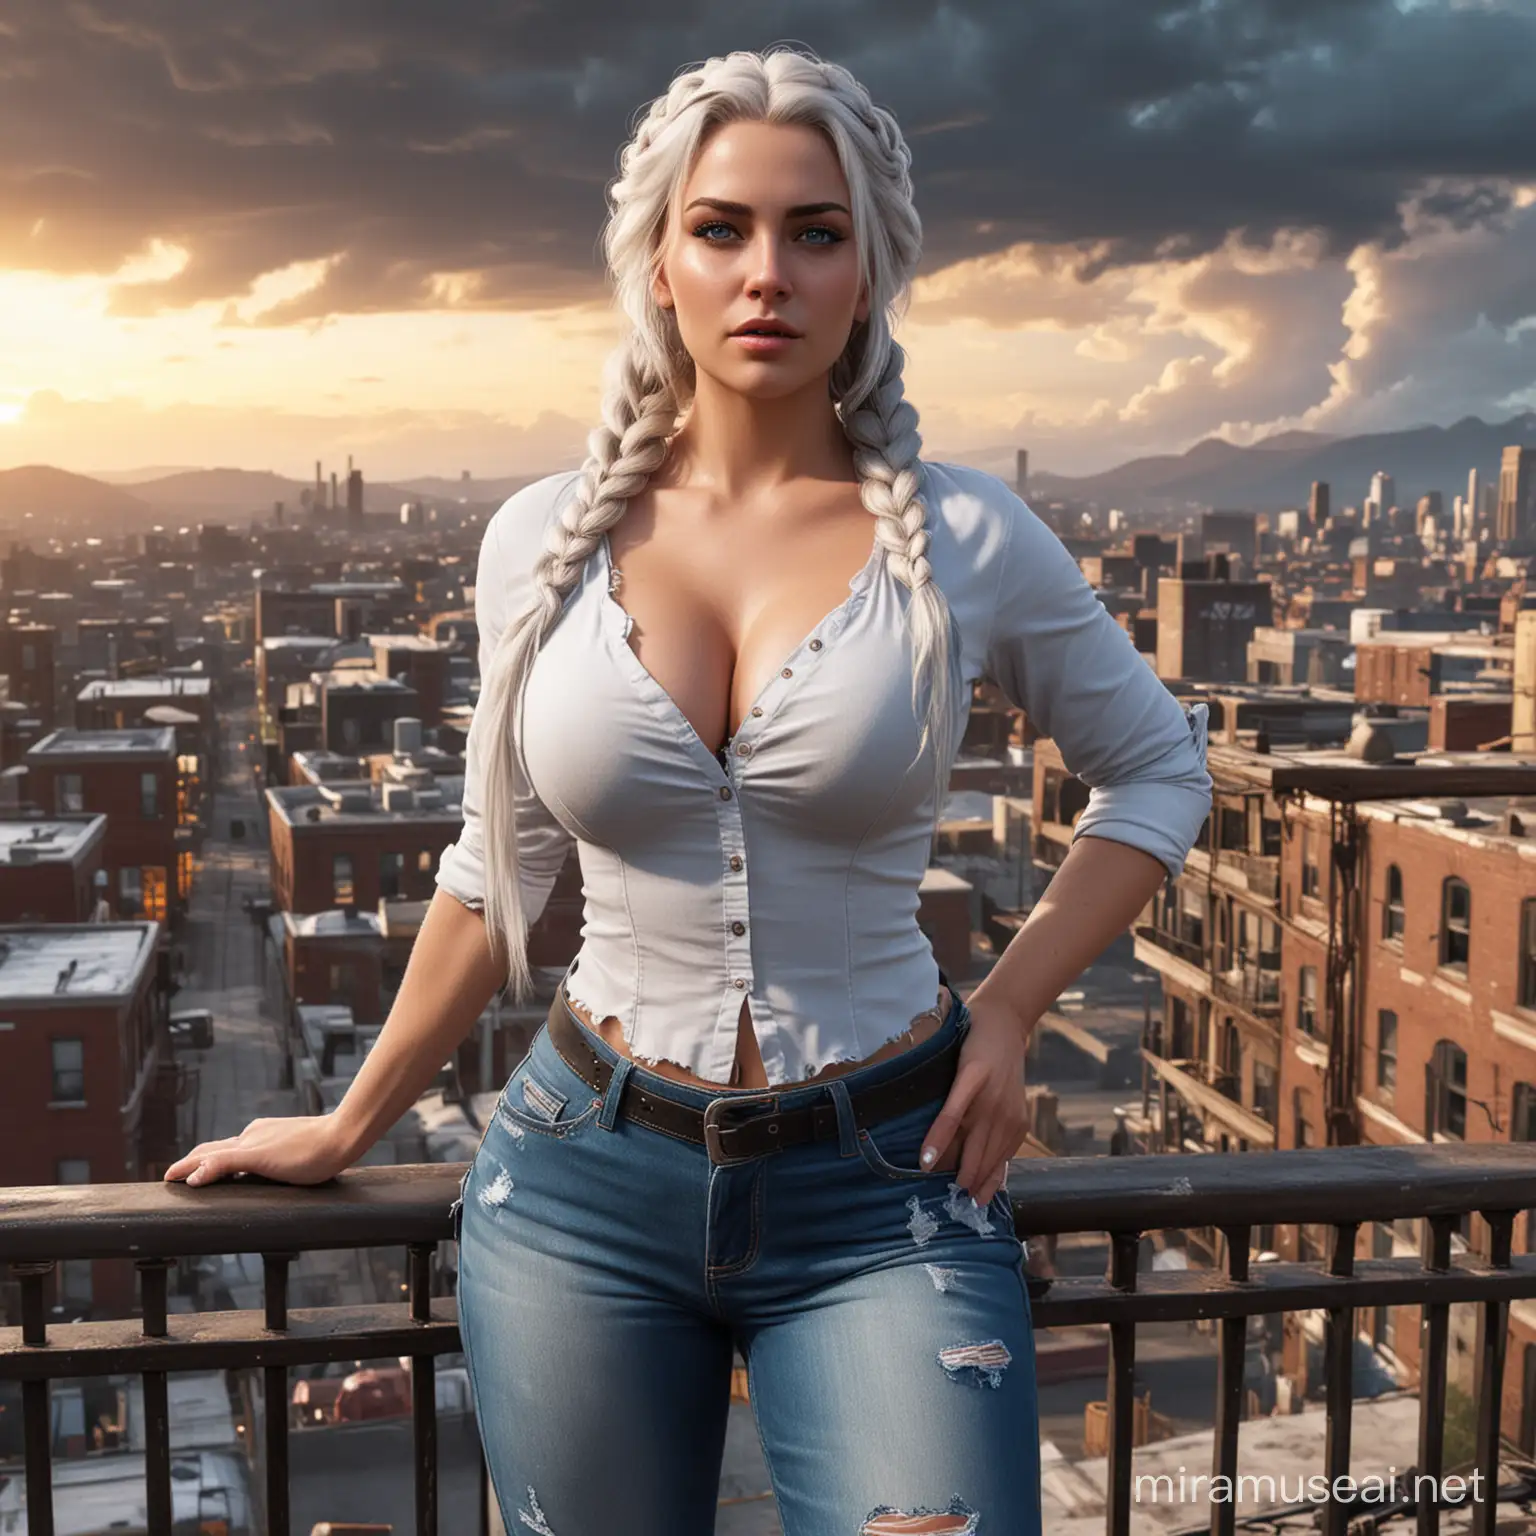 Fierce Woman with Hourglass Figure Standing on Rooftop Overlooking Fallout 4 Cityscape at Sunset